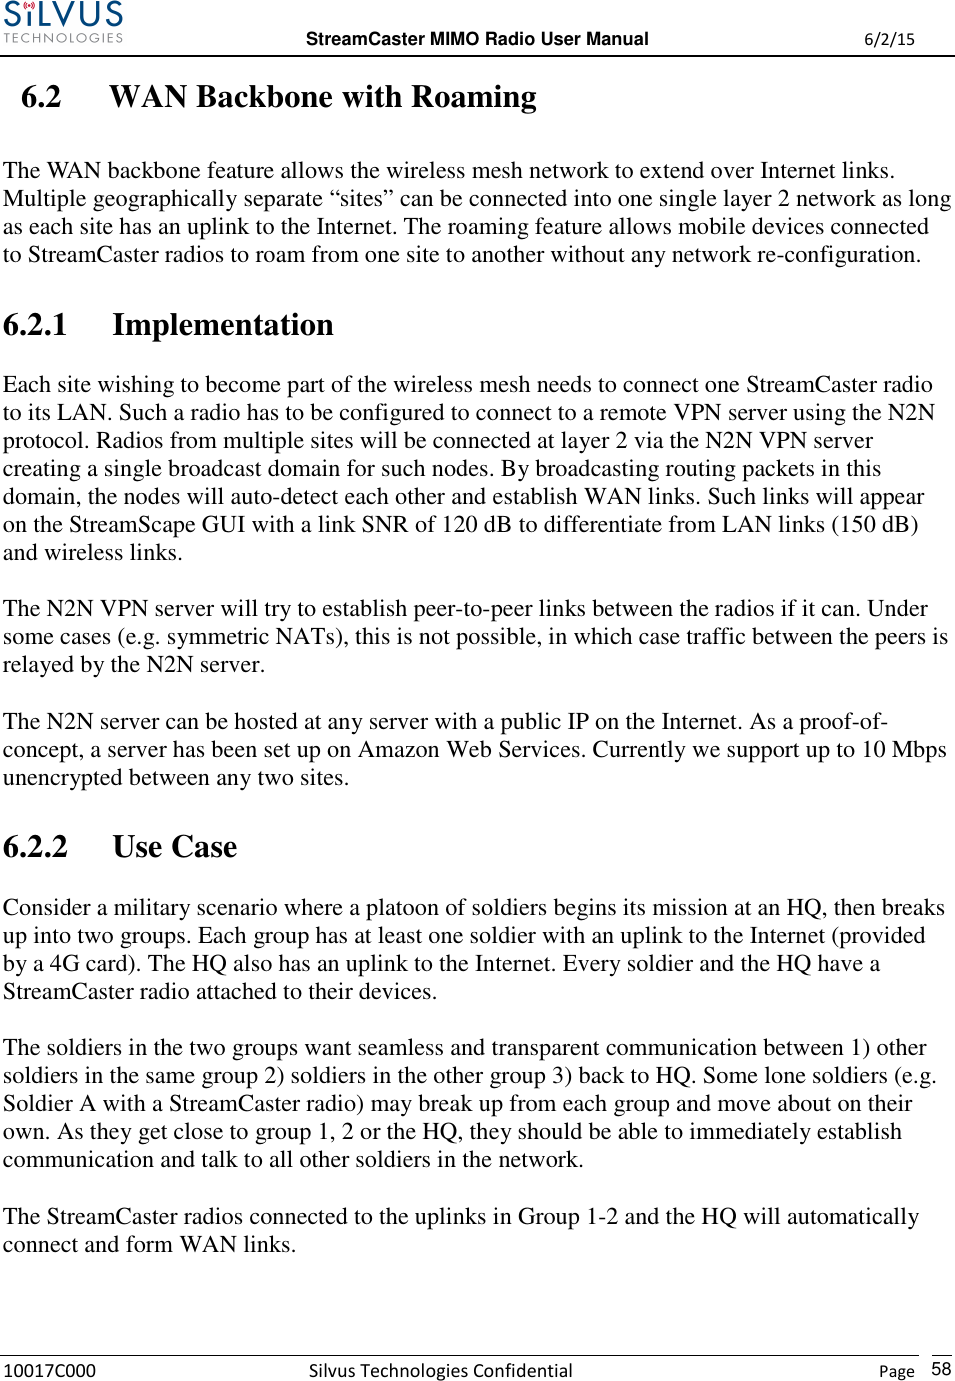  StreamCaster MIMO Radio User Manual  6/2/15 10017C000 Silvus Technologies Confidential    Page   58 6.2 WAN Backbone with Roaming The WAN backbone feature allows the wireless mesh network to extend over Internet links. Multiple geographically separate “sites” can be connected into one single layer 2 network as long as each site has an uplink to the Internet. The roaming feature allows mobile devices connected to StreamCaster radios to roam from one site to another without any network re-configuration. 6.2.1 Implementation Each site wishing to become part of the wireless mesh needs to connect one StreamCaster radio to its LAN. Such a radio has to be configured to connect to a remote VPN server using the N2N protocol. Radios from multiple sites will be connected at layer 2 via the N2N VPN server creating a single broadcast domain for such nodes. By broadcasting routing packets in this domain, the nodes will auto-detect each other and establish WAN links. Such links will appear on the StreamScape GUI with a link SNR of 120 dB to differentiate from LAN links (150 dB) and wireless links.  The N2N VPN server will try to establish peer-to-peer links between the radios if it can. Under some cases (e.g. symmetric NATs), this is not possible, in which case traffic between the peers is relayed by the N2N server. The N2N server can be hosted at any server with a public IP on the Internet. As a proof-of-concept, a server has been set up on Amazon Web Services. Currently we support up to 10 Mbps unencrypted between any two sites. 6.2.2 Use Case Consider a military scenario where a platoon of soldiers begins its mission at an HQ, then breaks up into two groups. Each group has at least one soldier with an uplink to the Internet (provided by a 4G card). The HQ also has an uplink to the Internet. Every soldier and the HQ have a StreamCaster radio attached to their devices. The soldiers in the two groups want seamless and transparent communication between 1) other soldiers in the same group 2) soldiers in the other group 3) back to HQ. Some lone soldiers (e.g. Soldier A with a StreamCaster radio) may break up from each group and move about on their own. As they get close to group 1, 2 or the HQ, they should be able to immediately establish communication and talk to all other soldiers in the network. The StreamCaster radios connected to the uplinks in Group 1-2 and the HQ will automatically connect and form WAN links. 